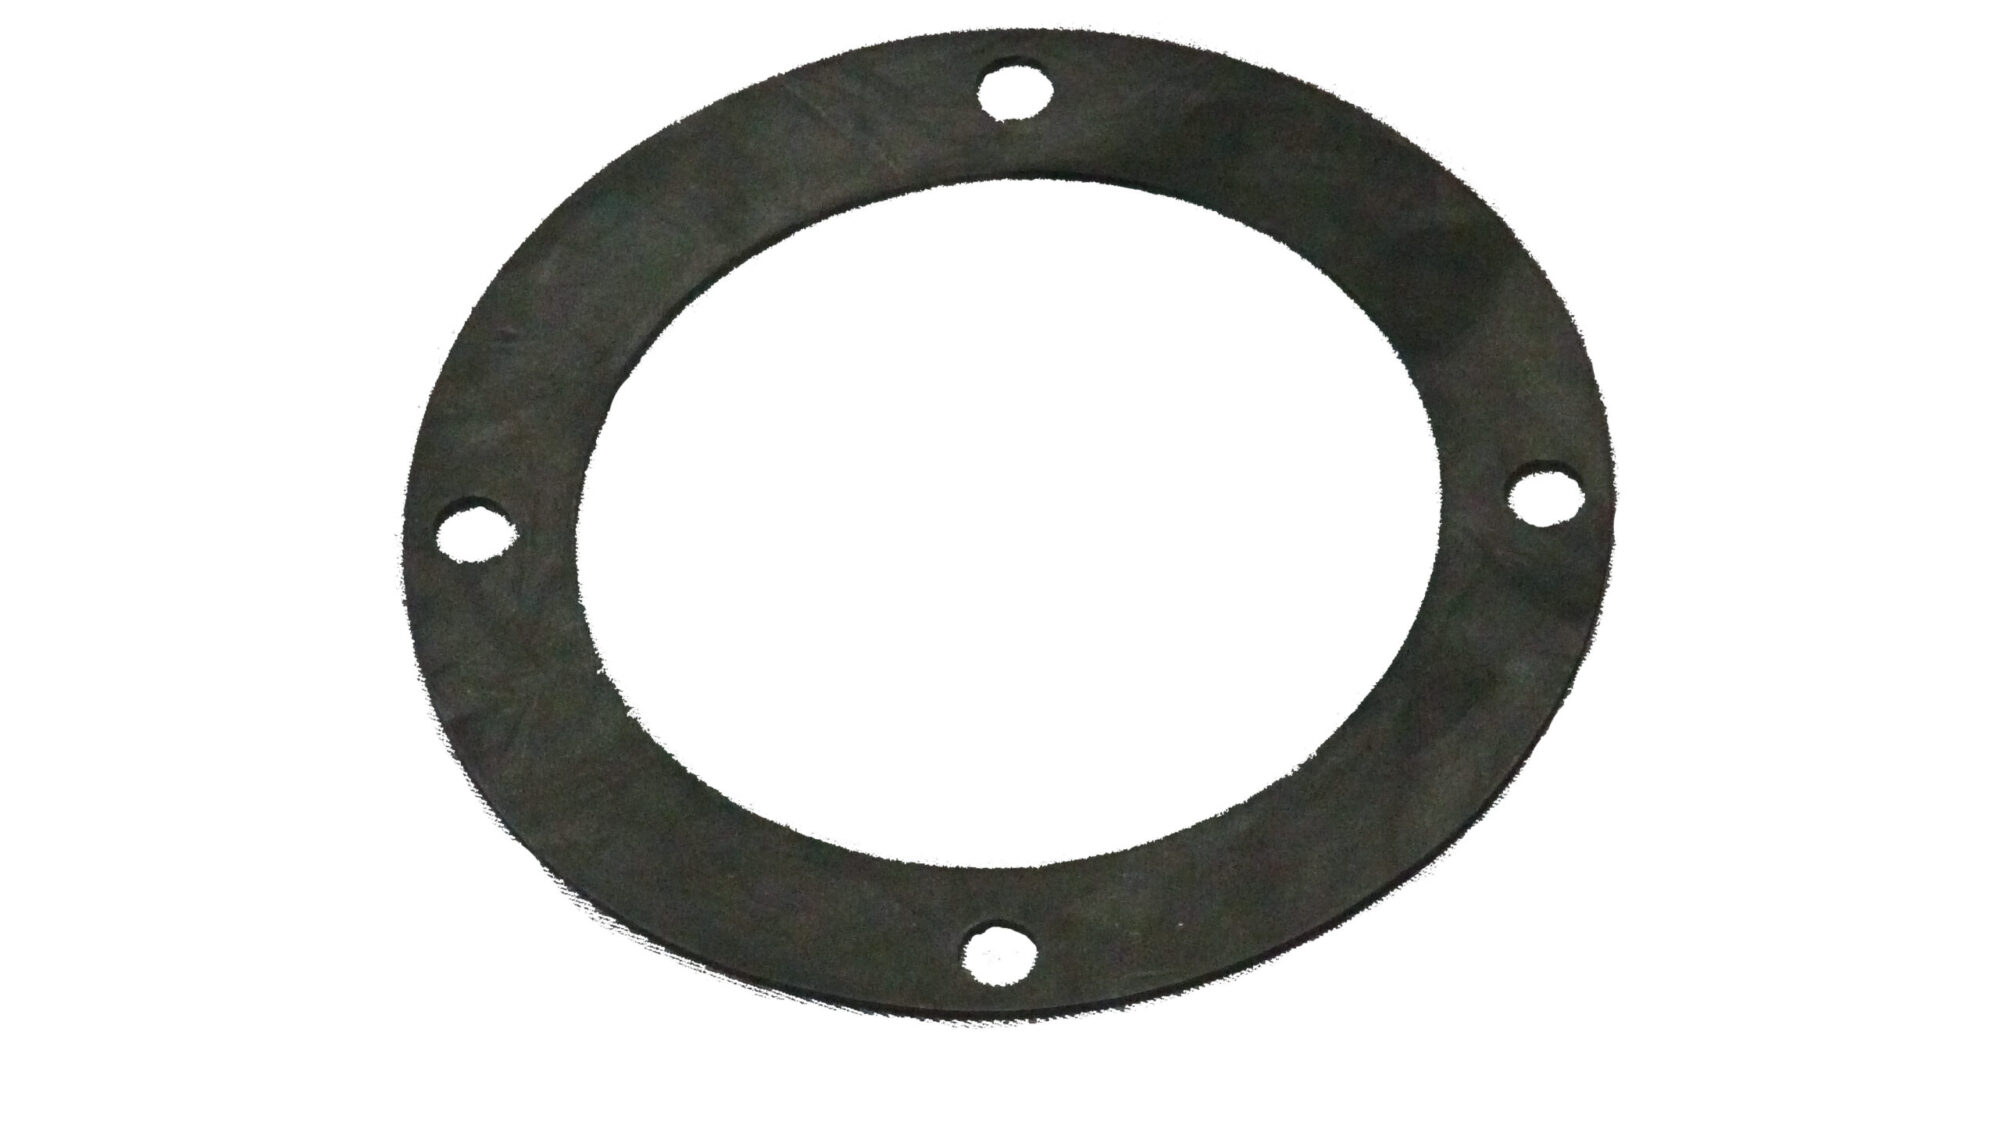 551G Gasket for a 3" Round Base or Single Column Tower